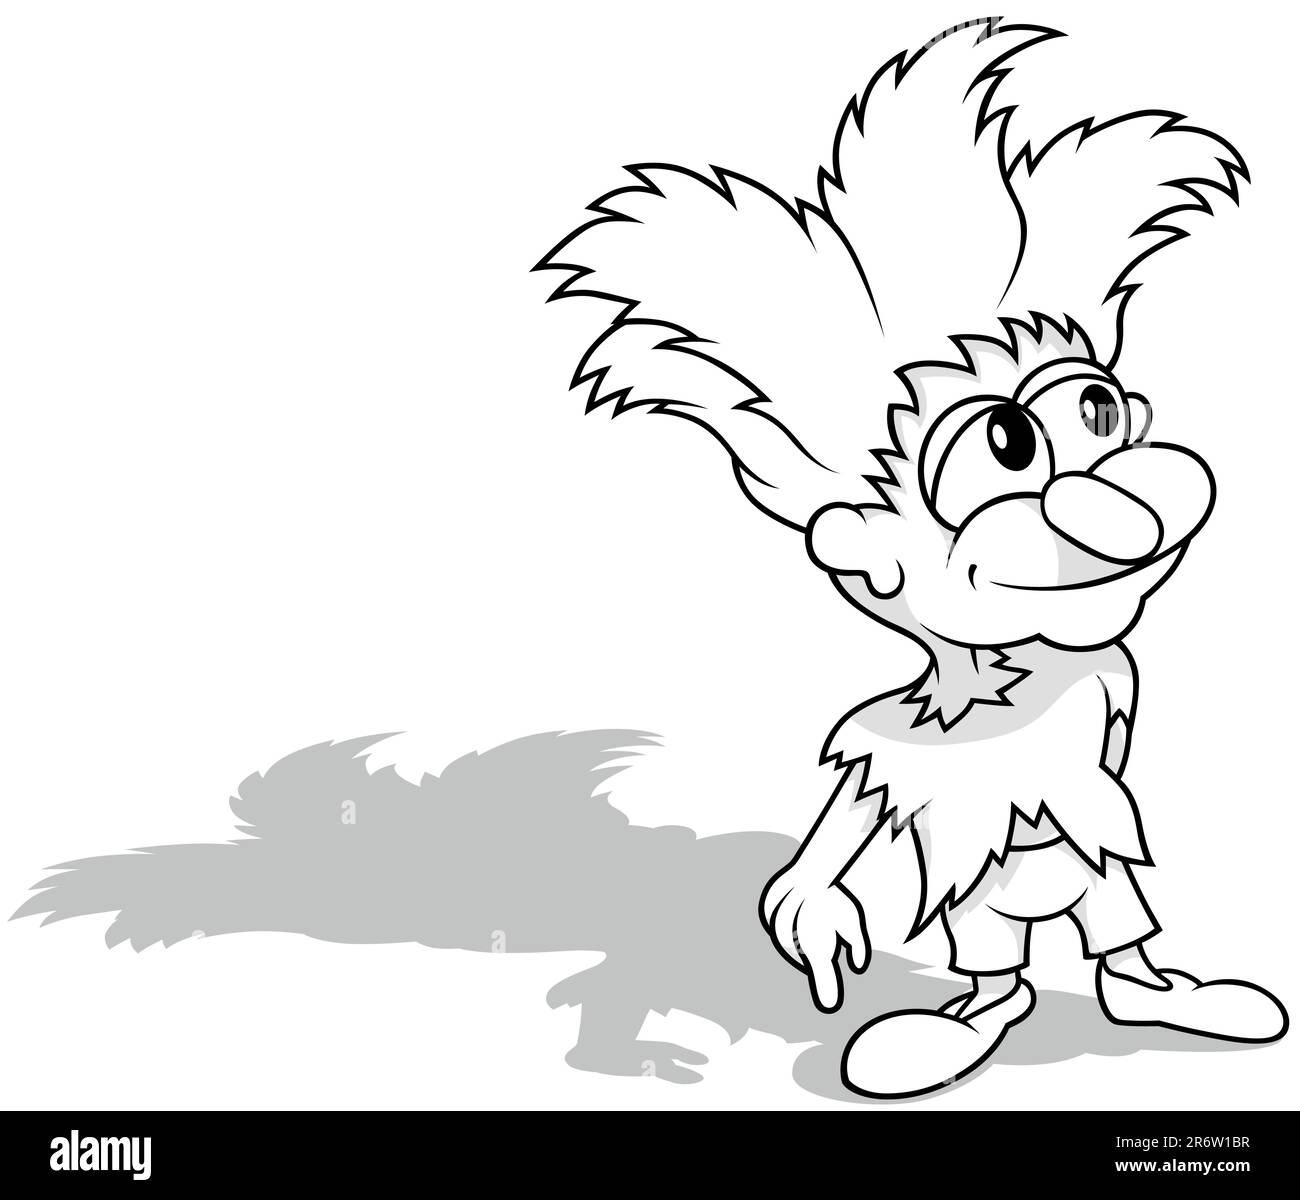 Drawing of Forest Leprechaun with Tousled Hair Stock Vector